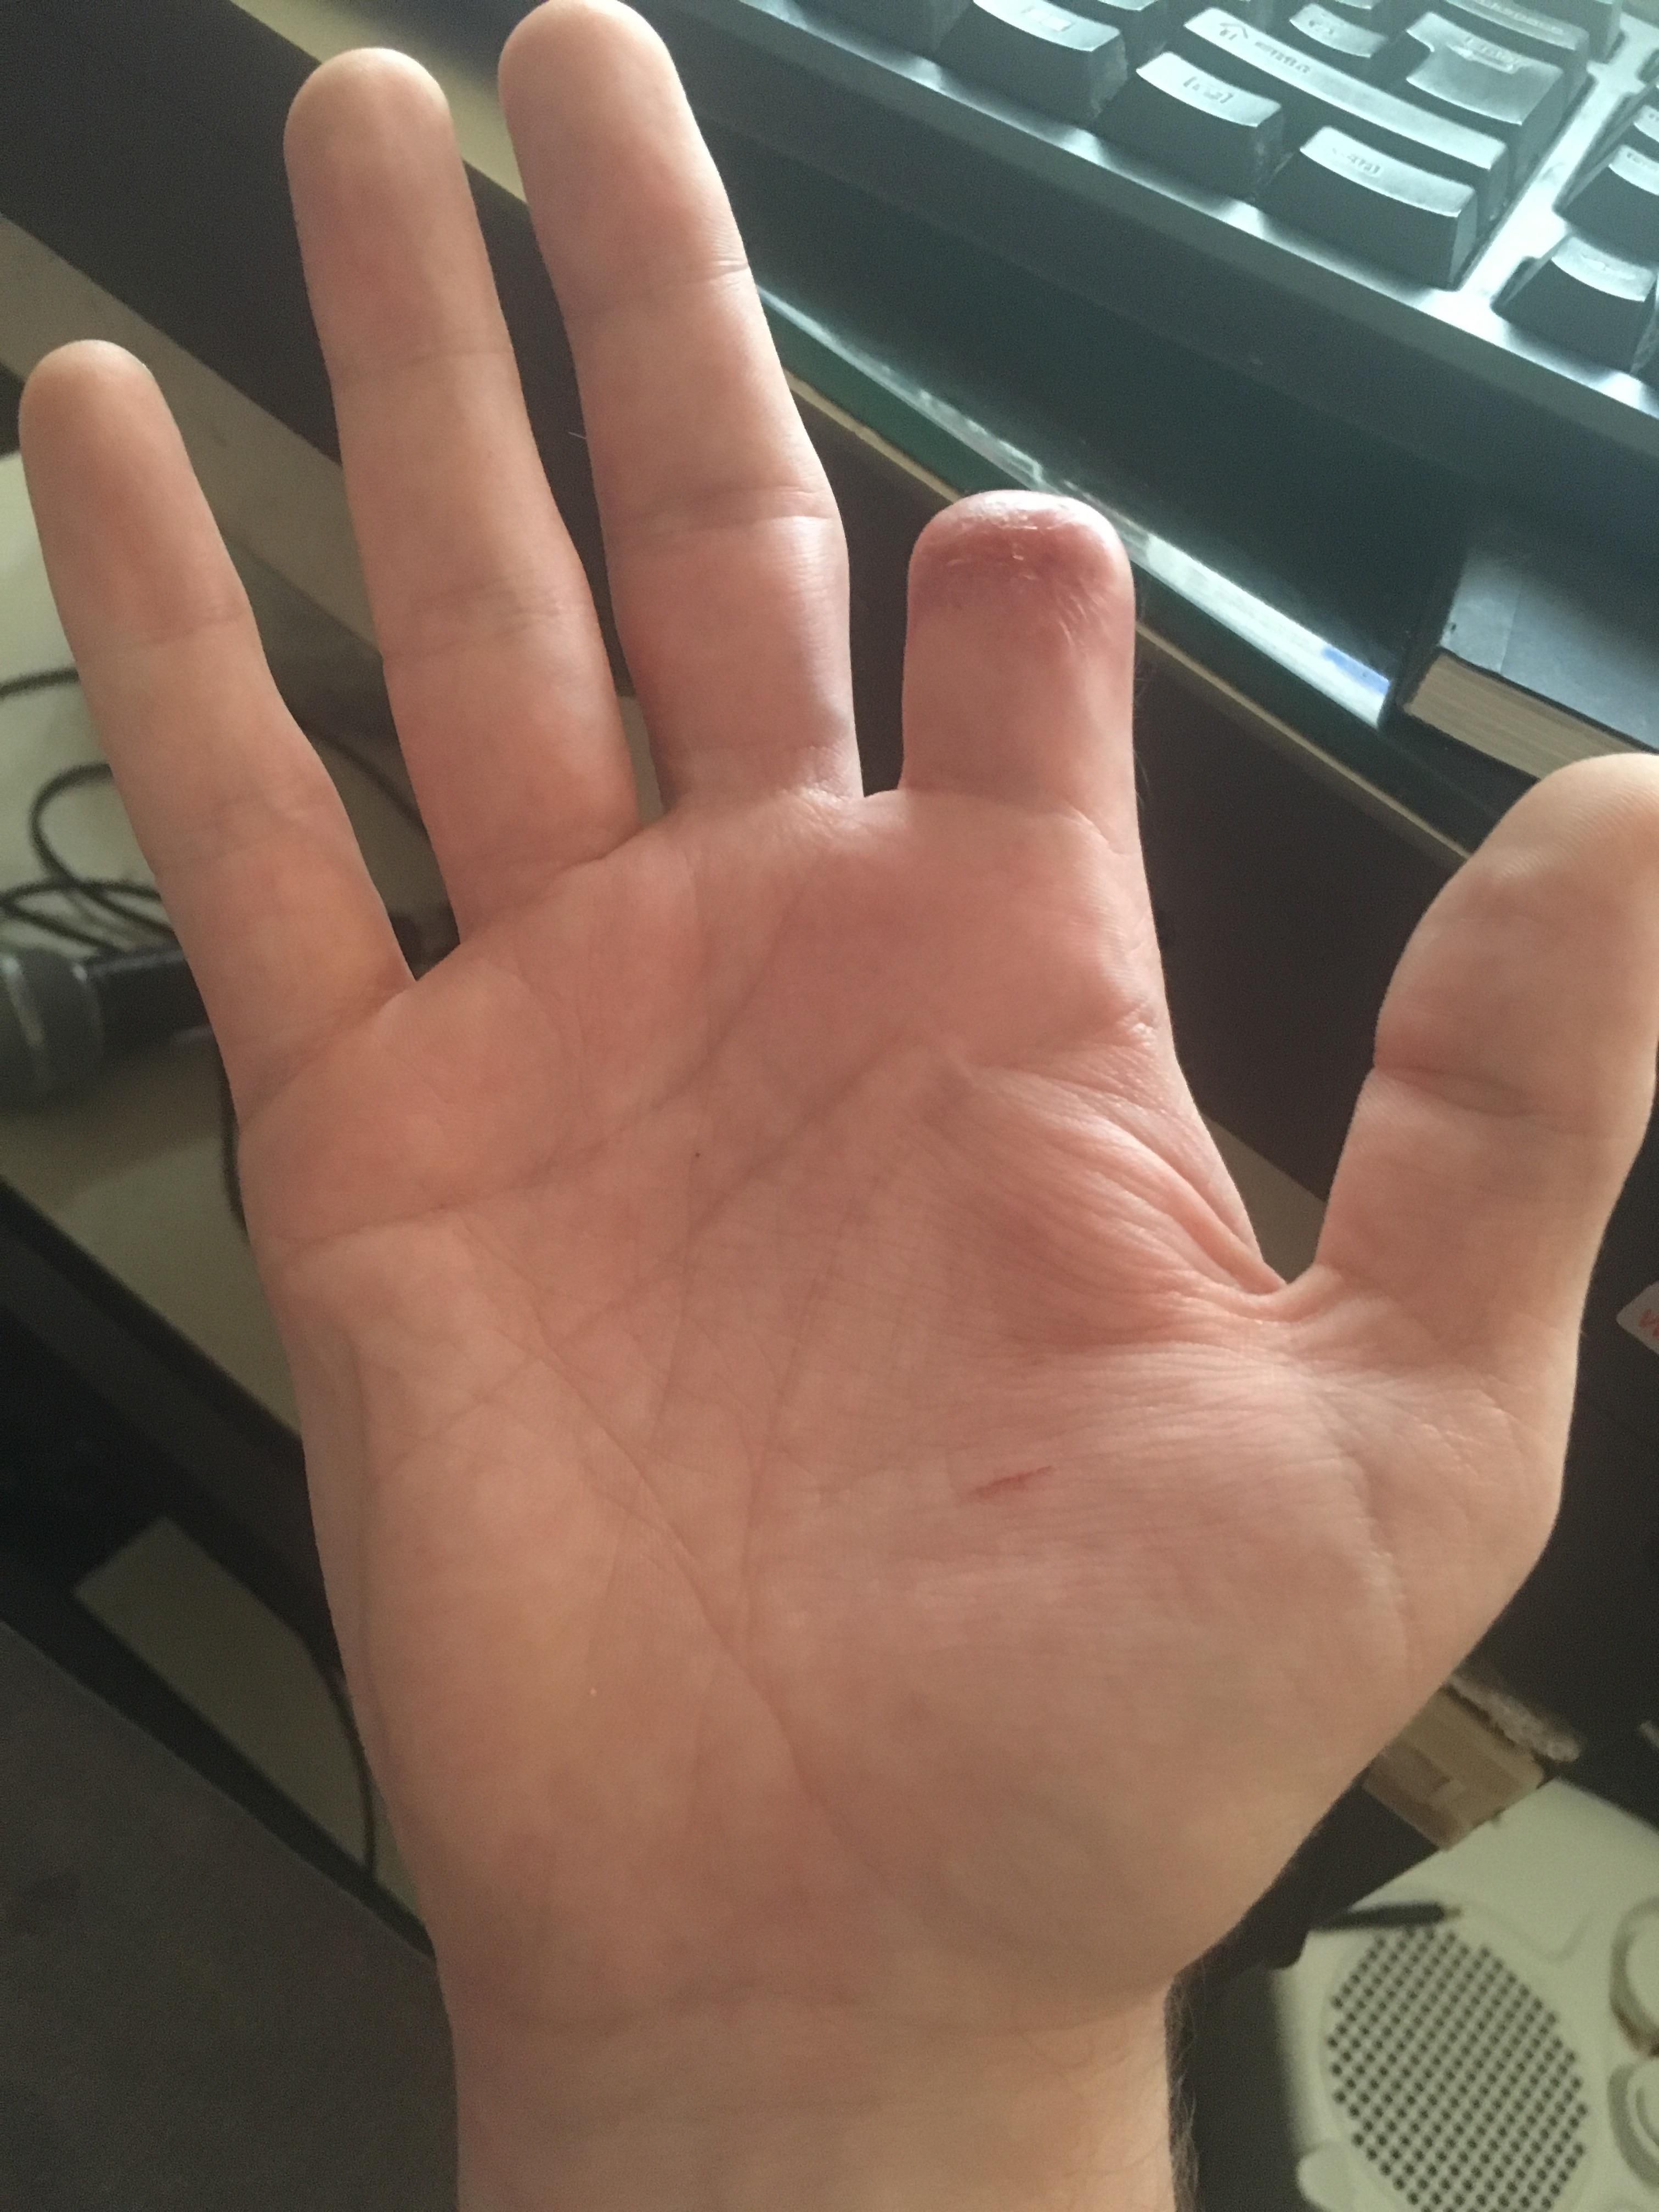 This is my hand, there's a joke in here somewhere... but I can't put my finger on it.